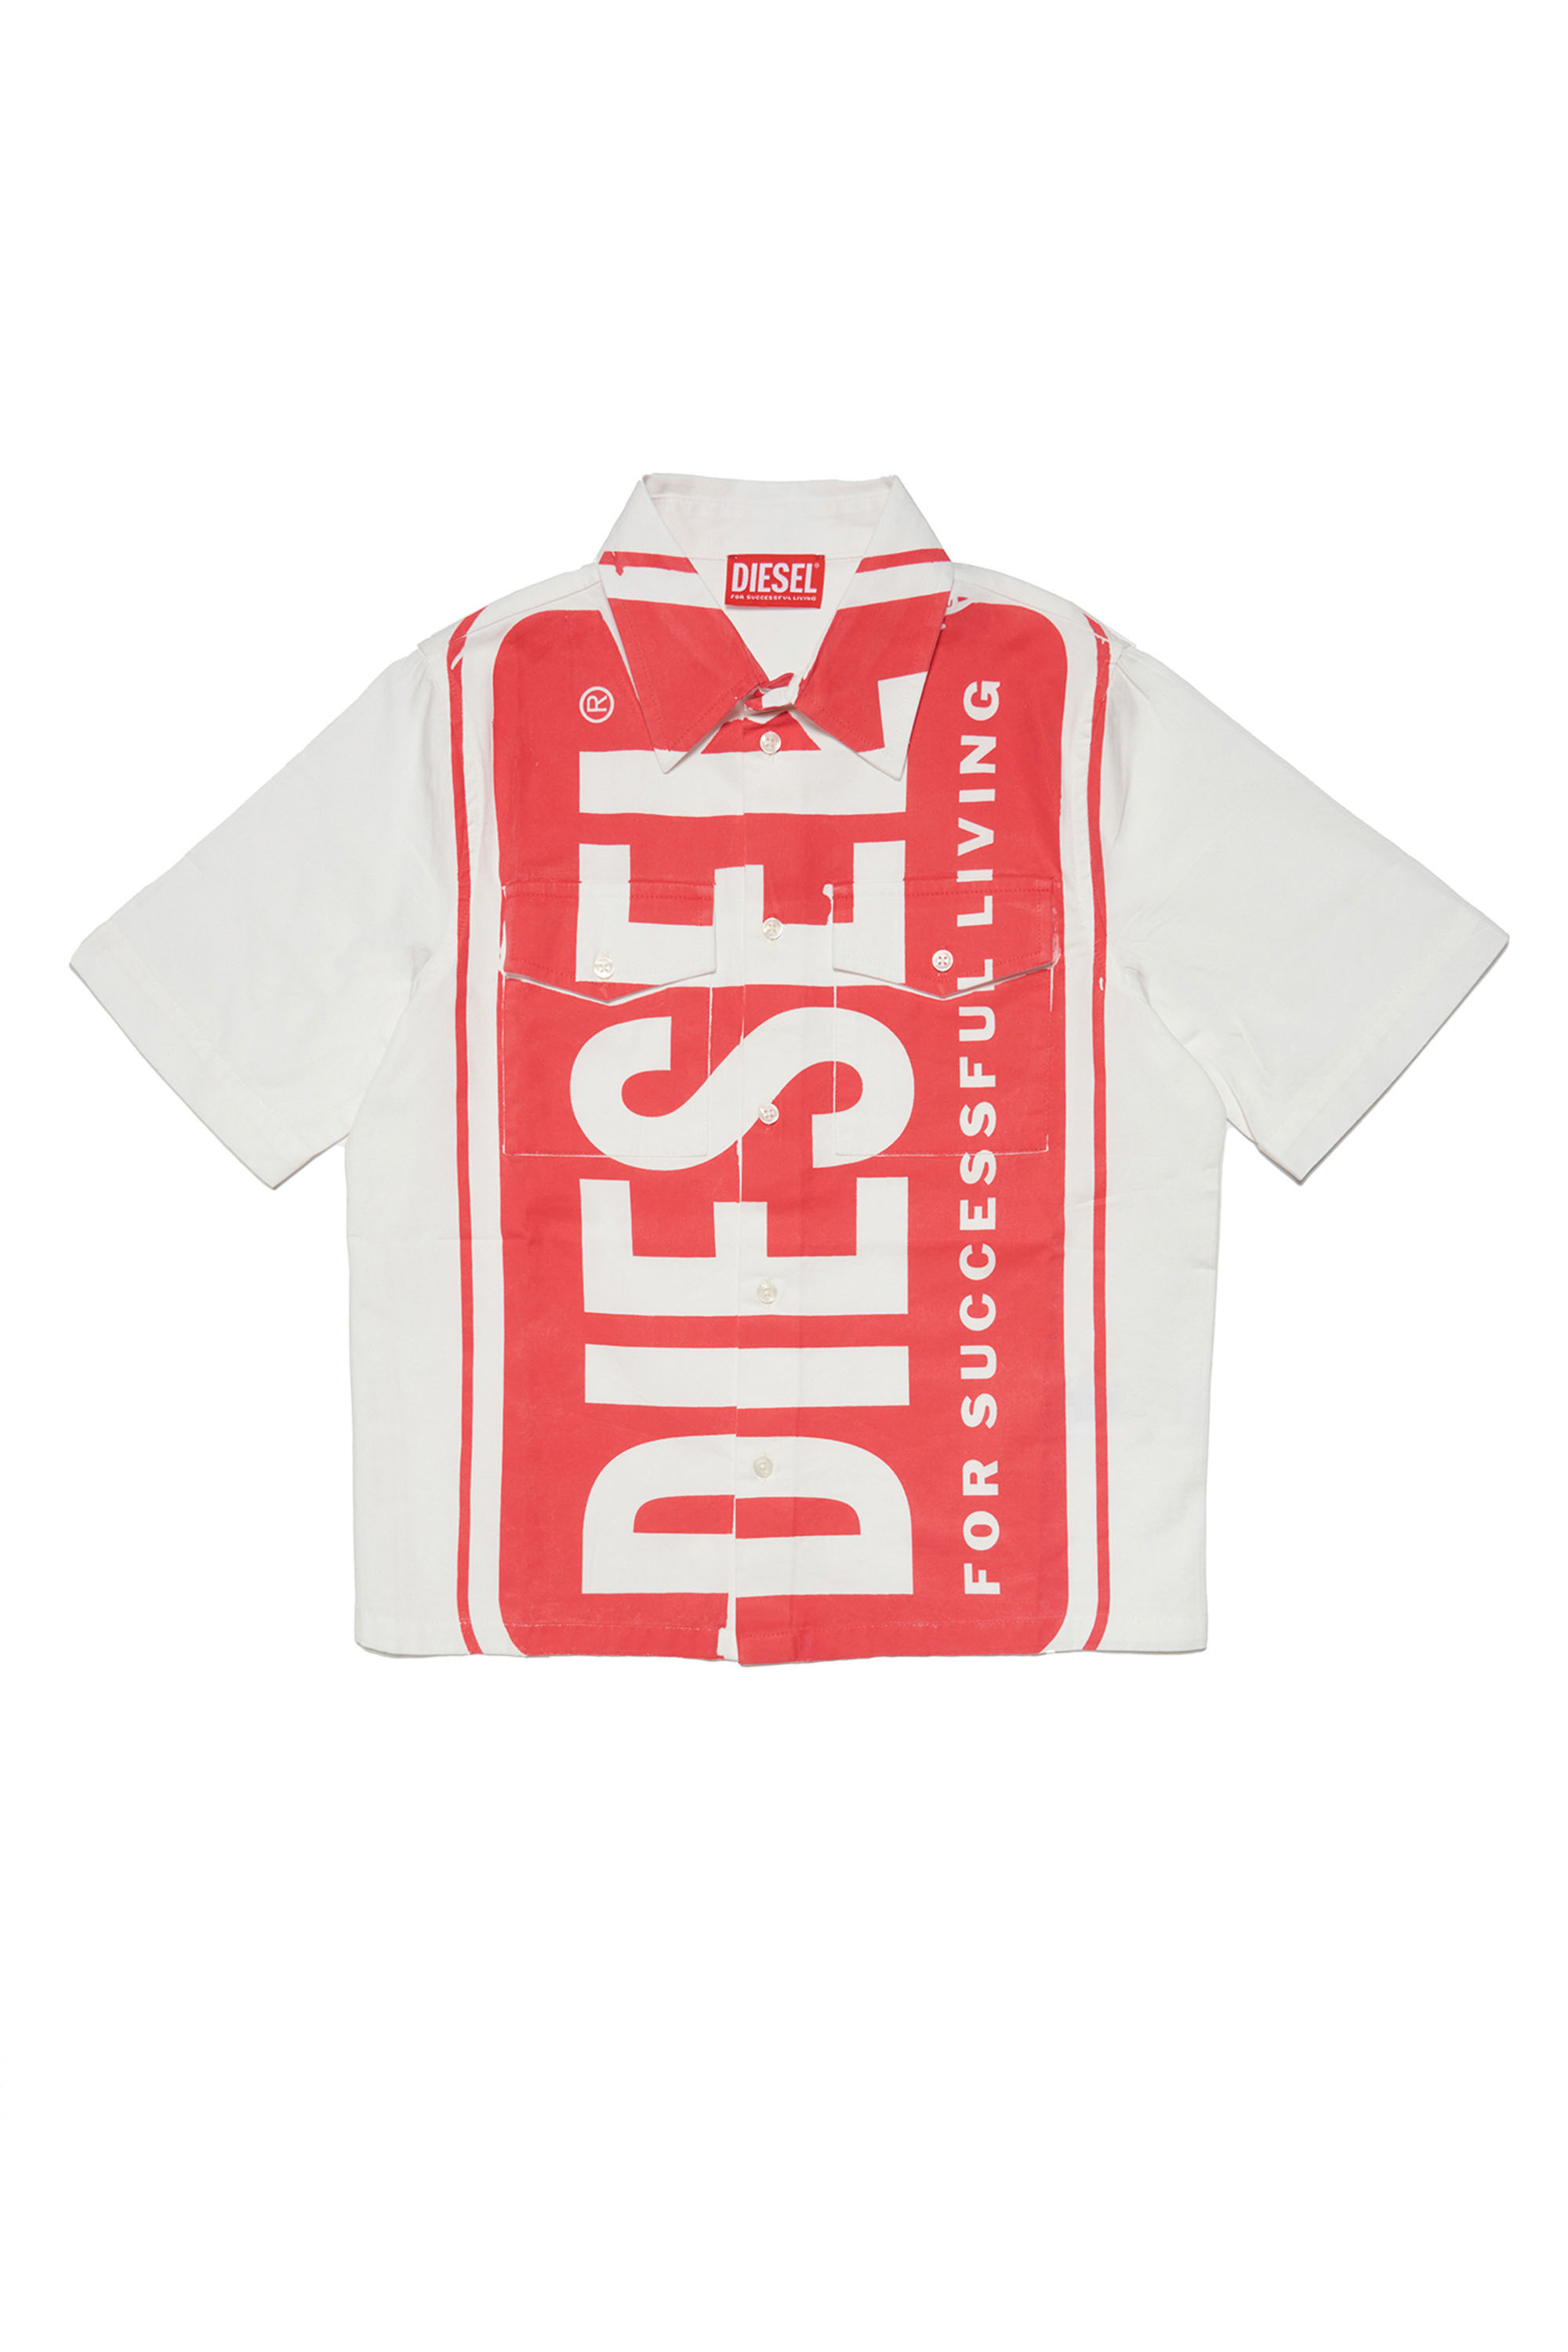 Diesel - CRISS, Weiss/Rot - Image 1